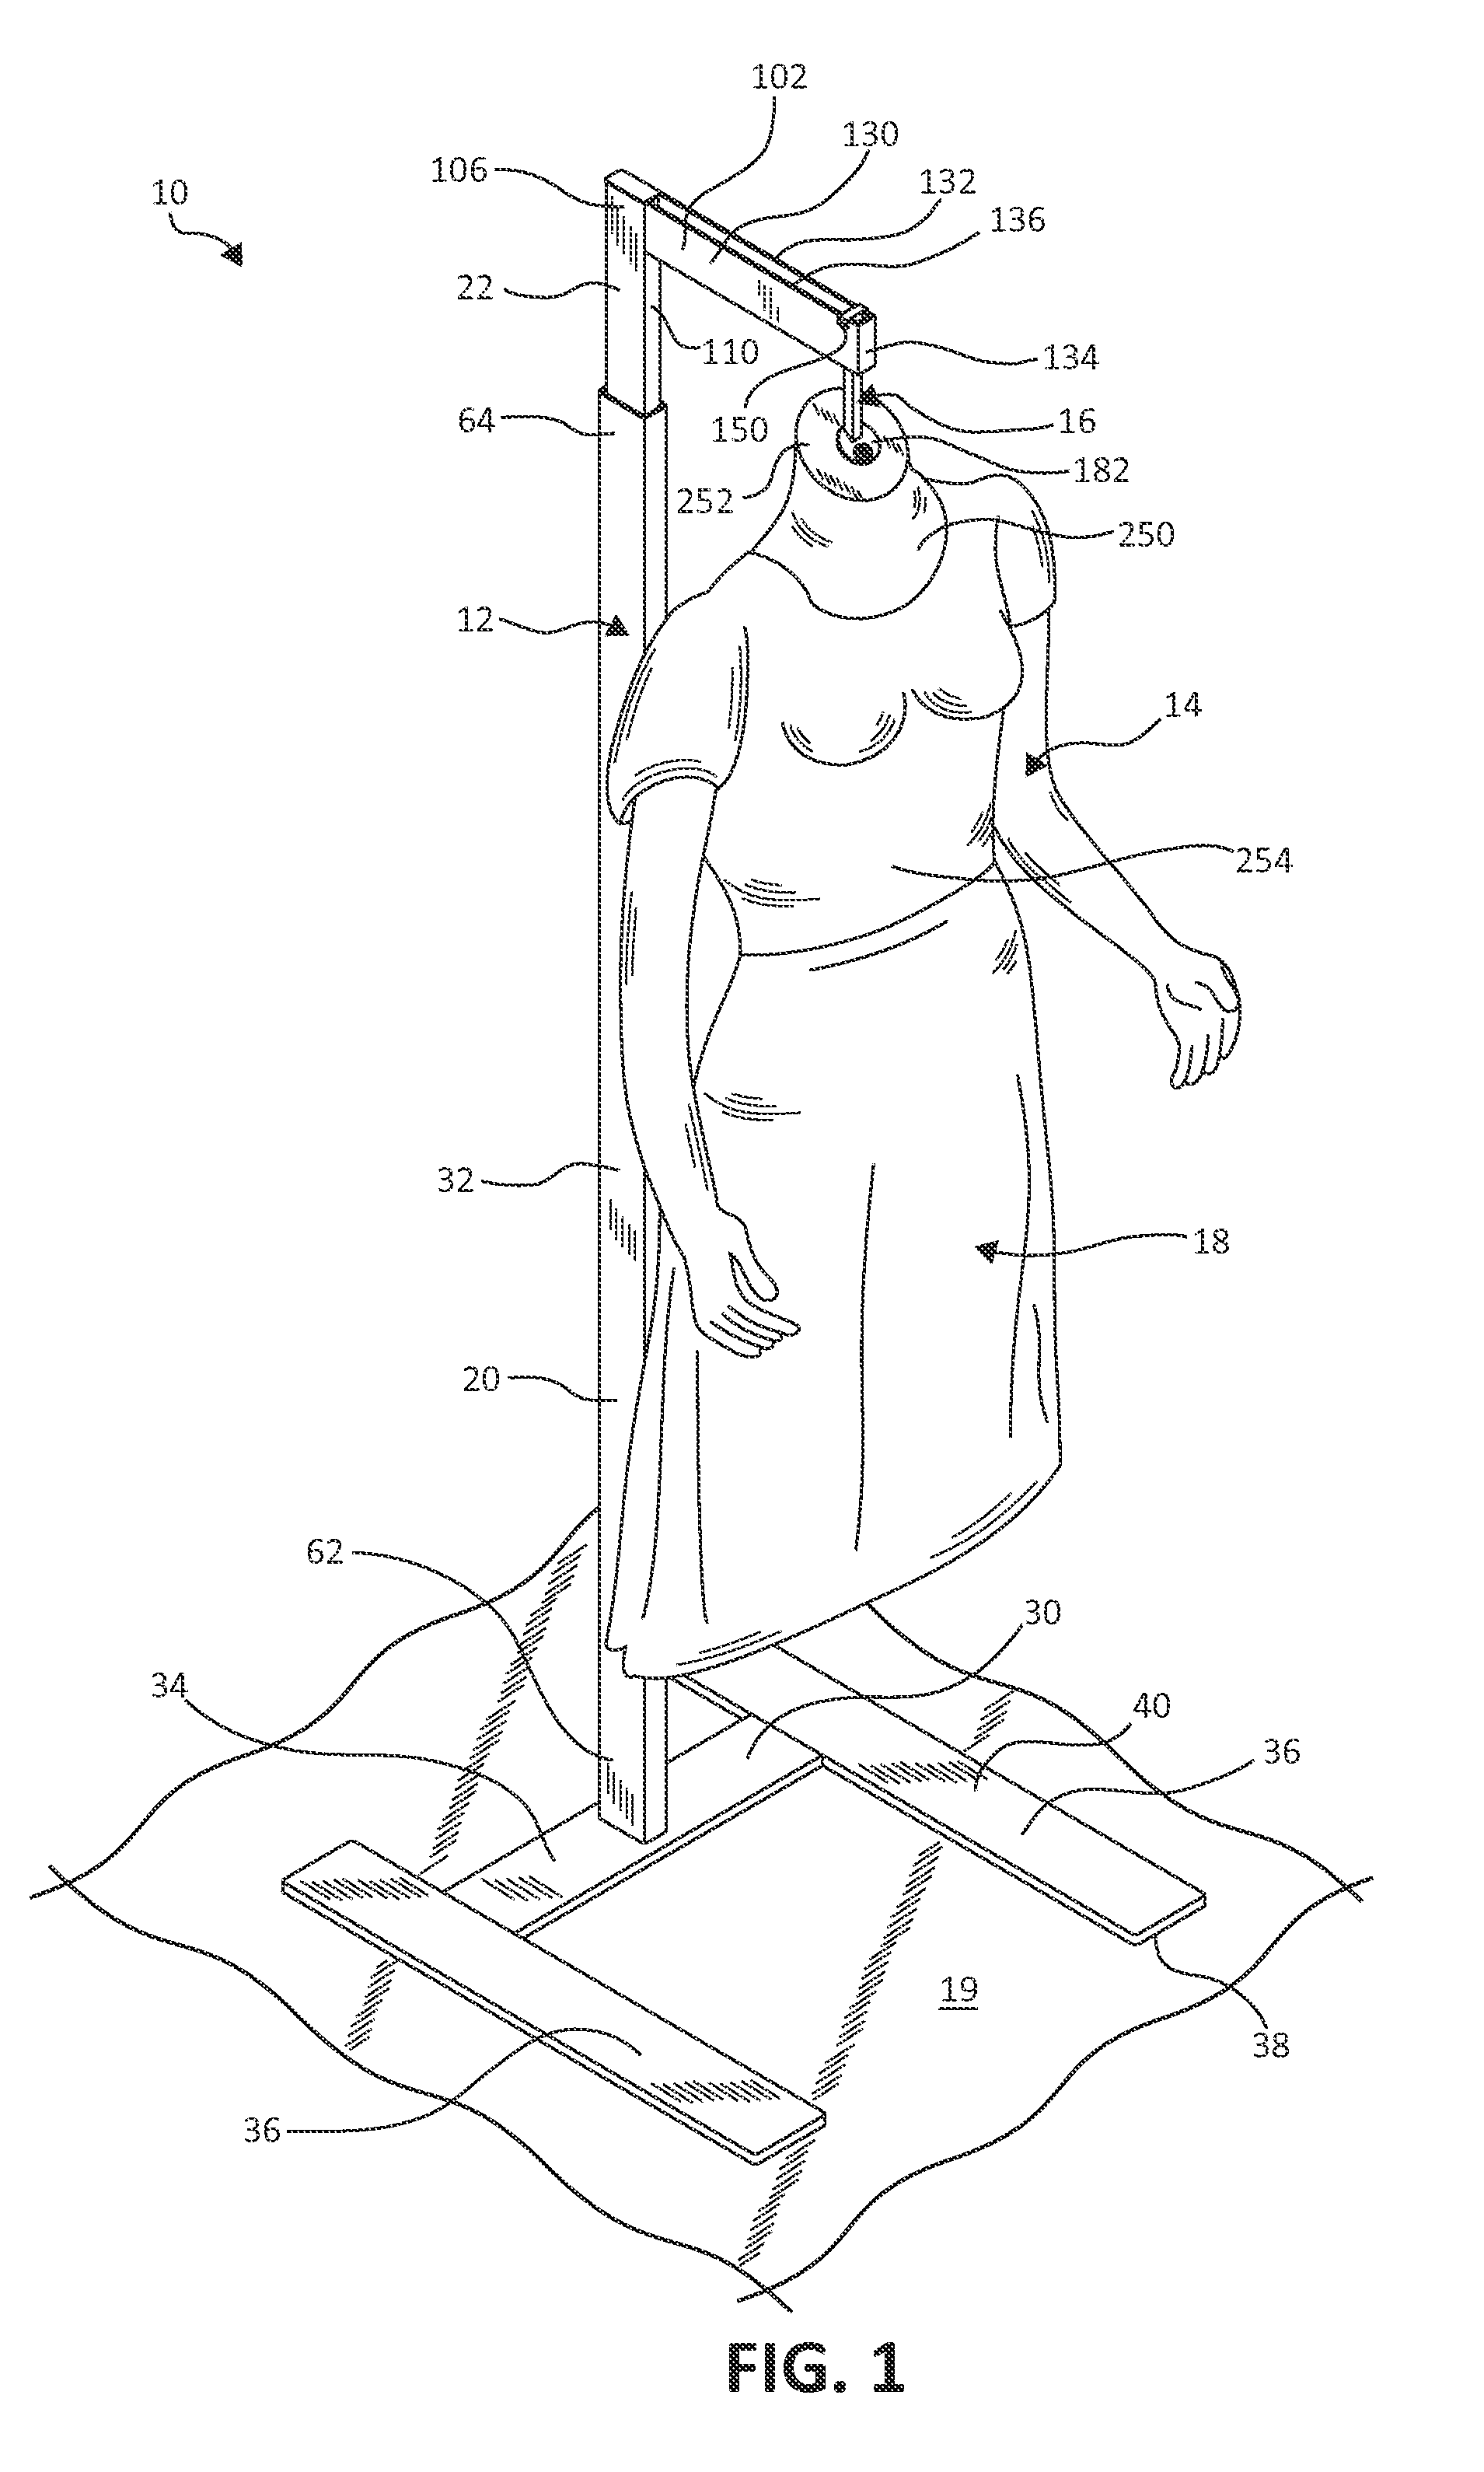 Display system with suspended merchandise support